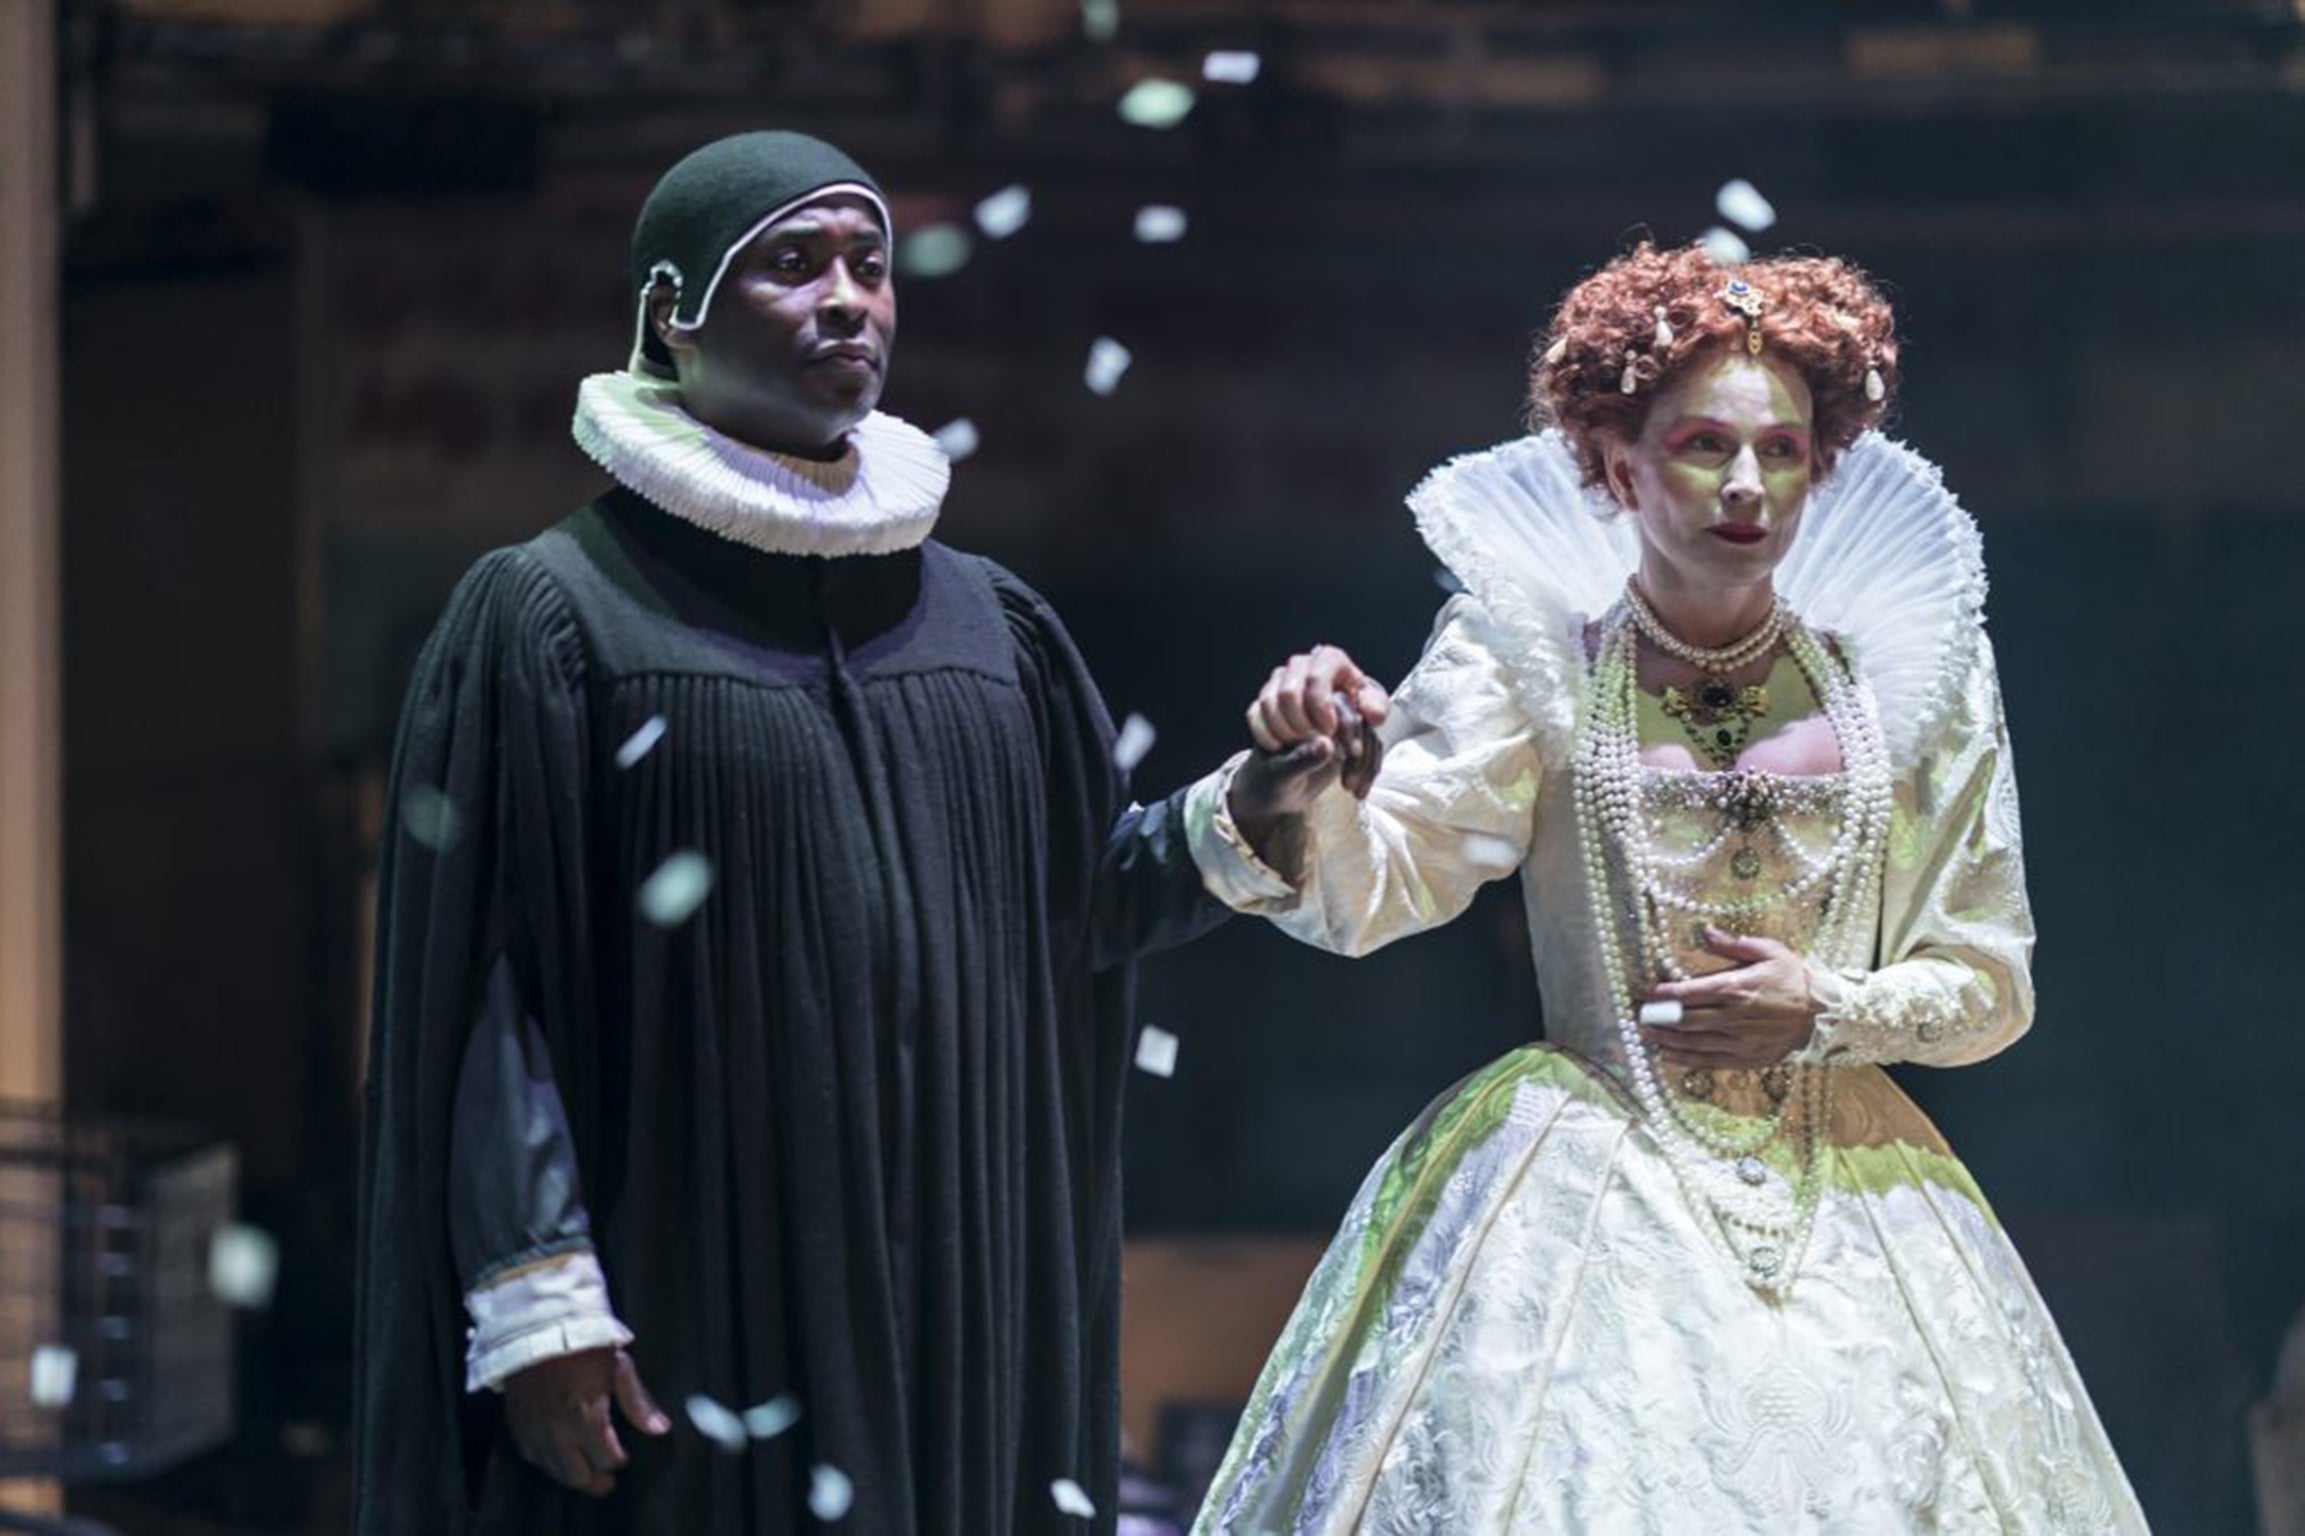 Harold Finley and Toyah Willcox in ‘Jubilee’, which opened at the Lyric Hammersmith this month